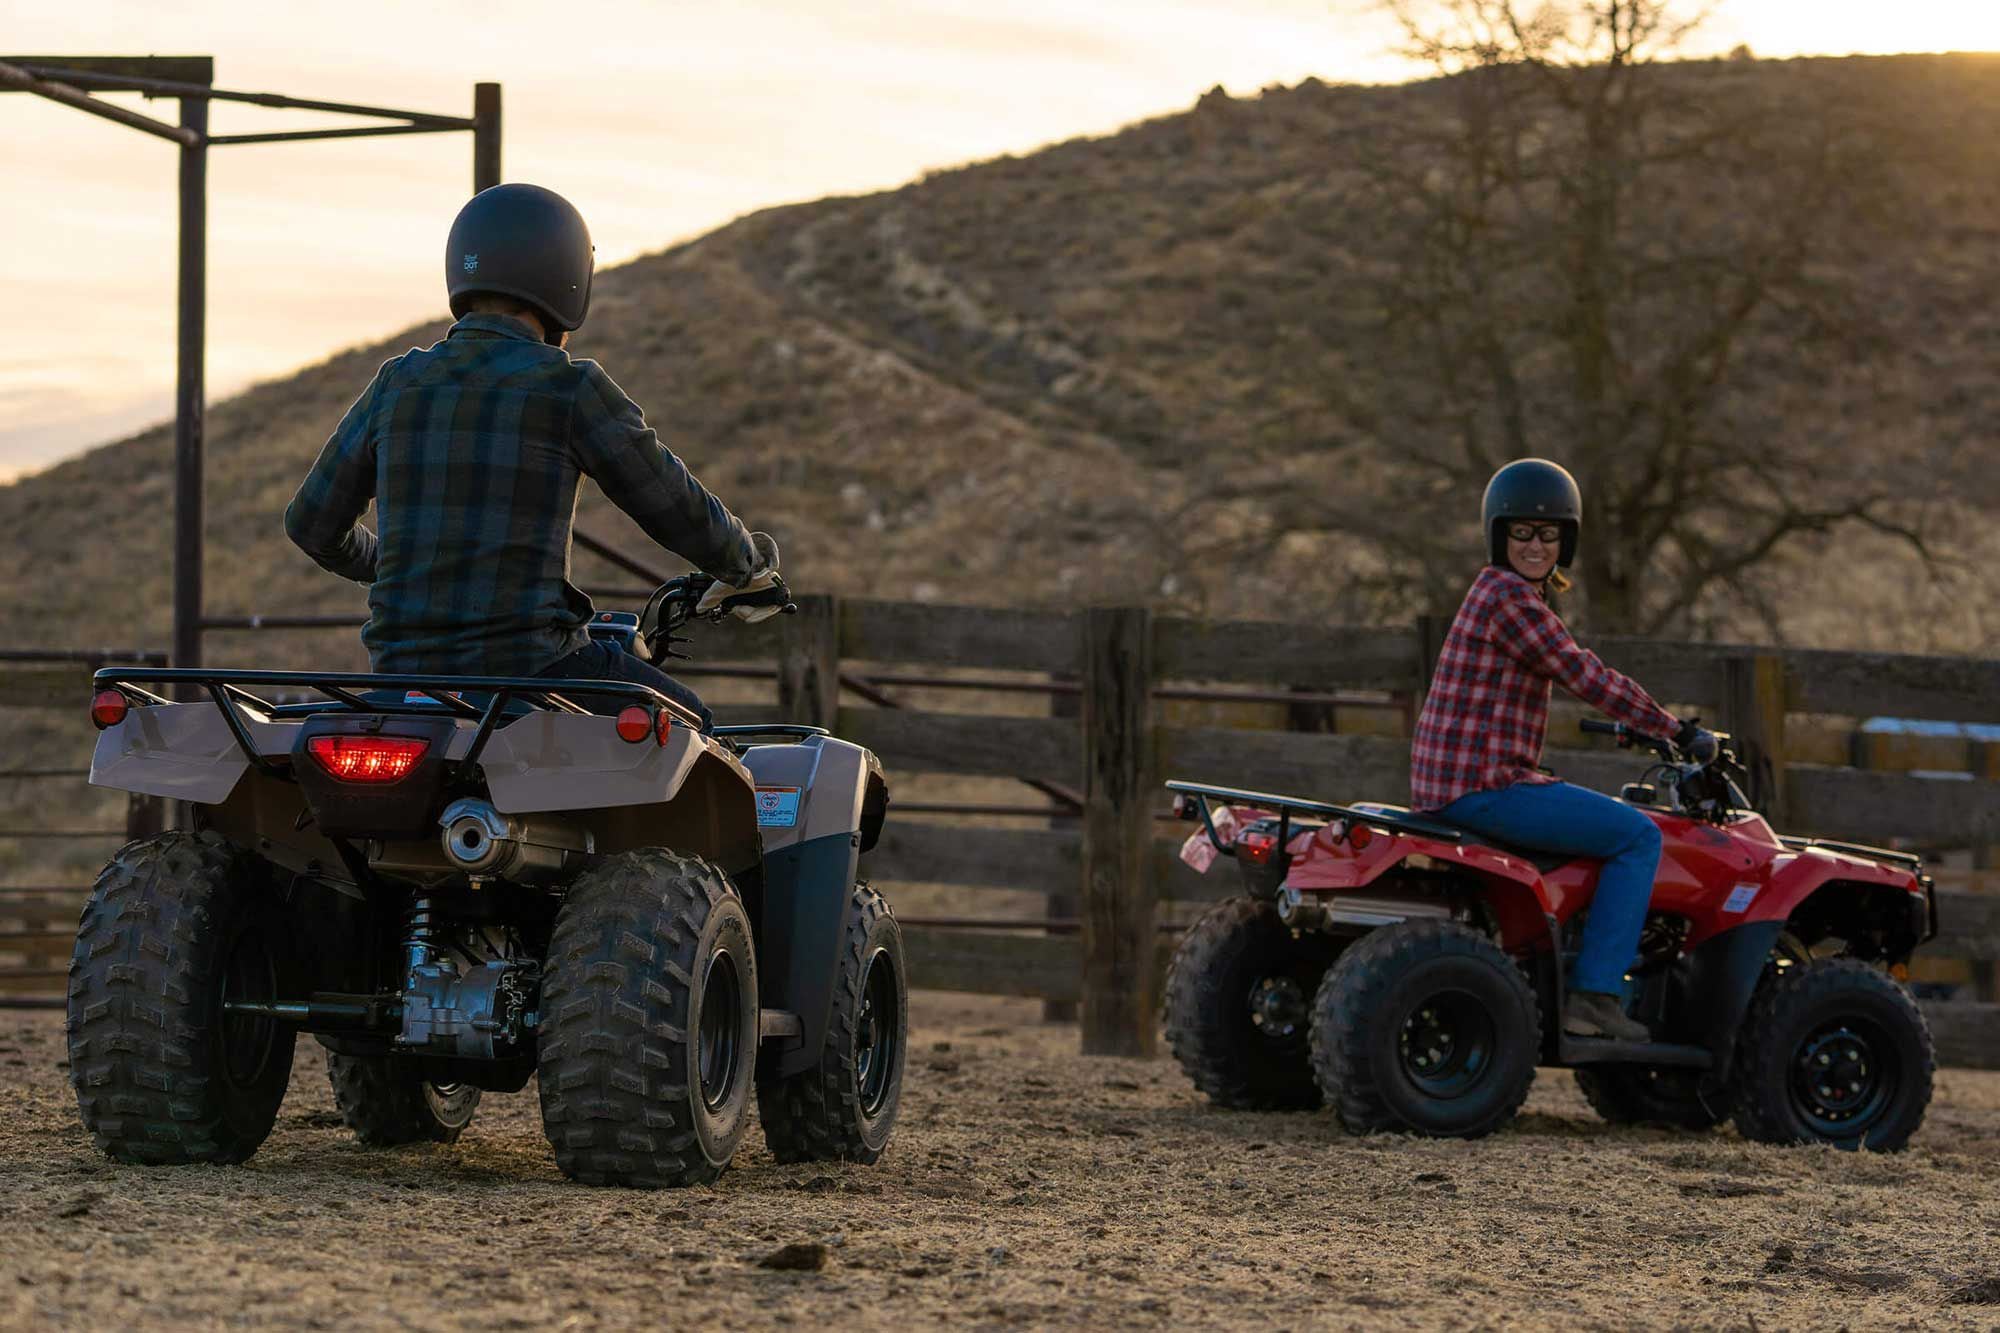 If your needs are light-duty ranch chores, Honda FourTrax Recon has your back.